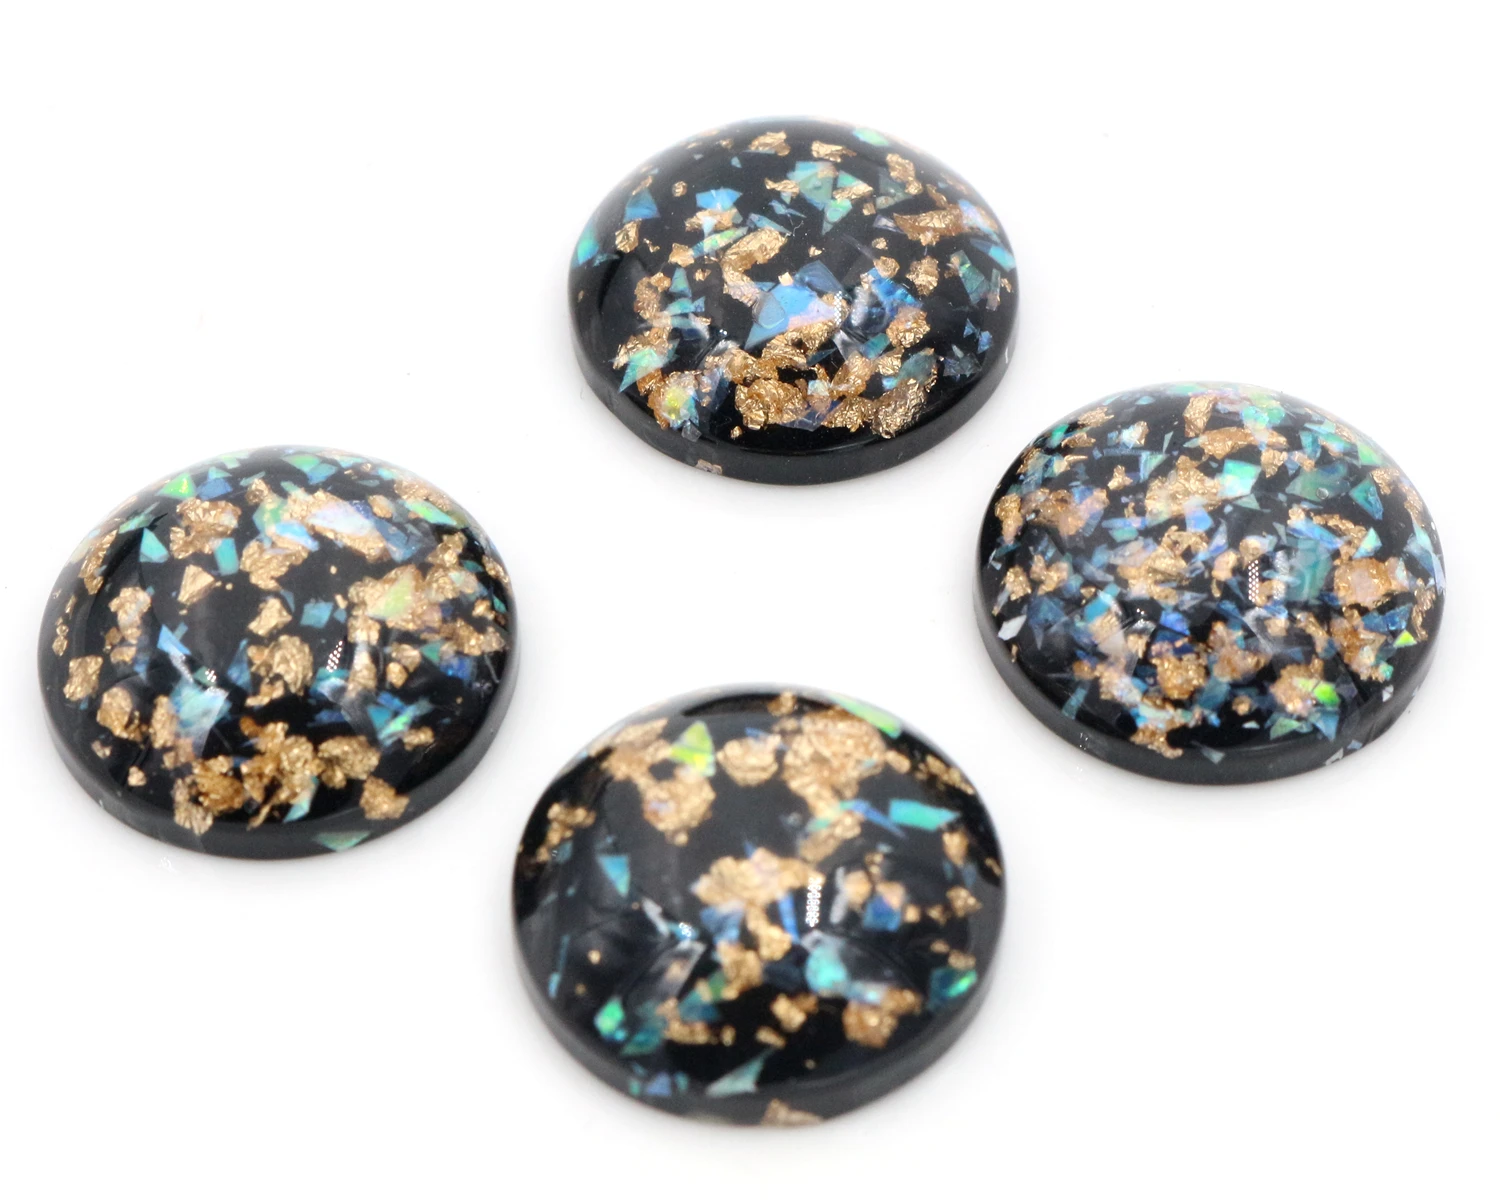 18mm Black with Gold Foil Round Resin Flatback Cabochons DIY Jewelry Set of 2